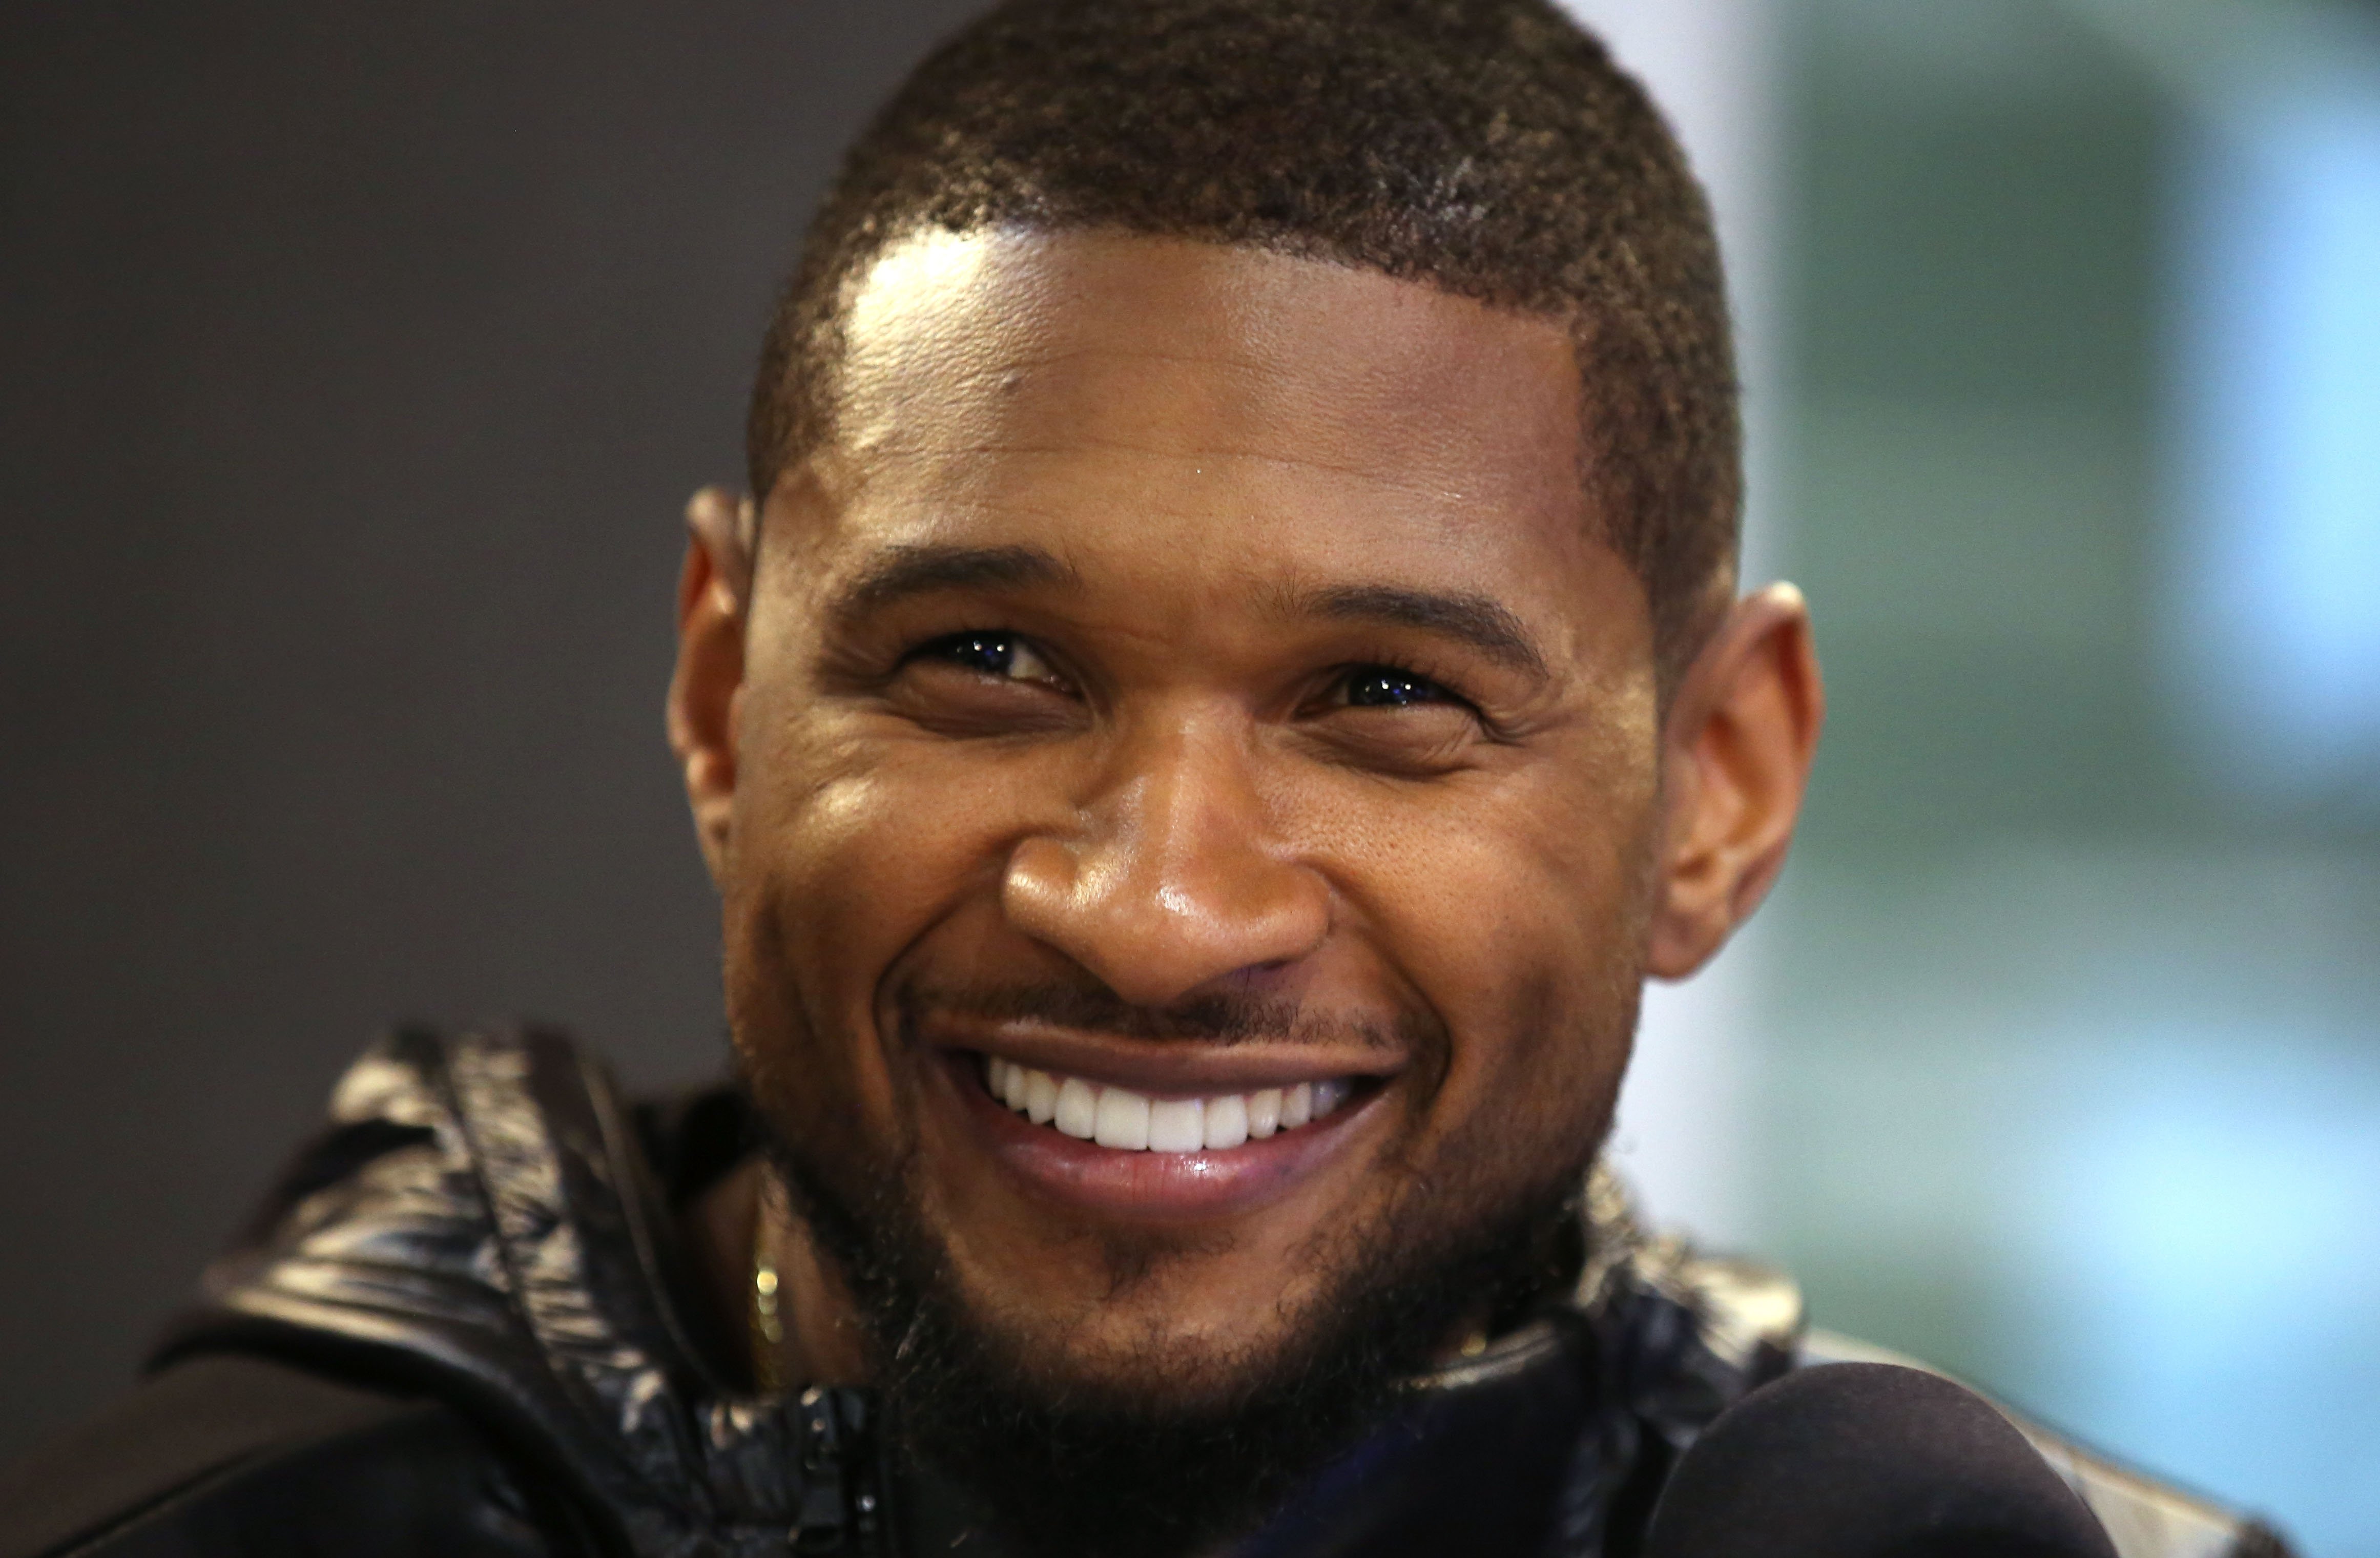 Usher visits Kiss FM Studio in London, England on December 17, 2014. | Photo: Getty Images